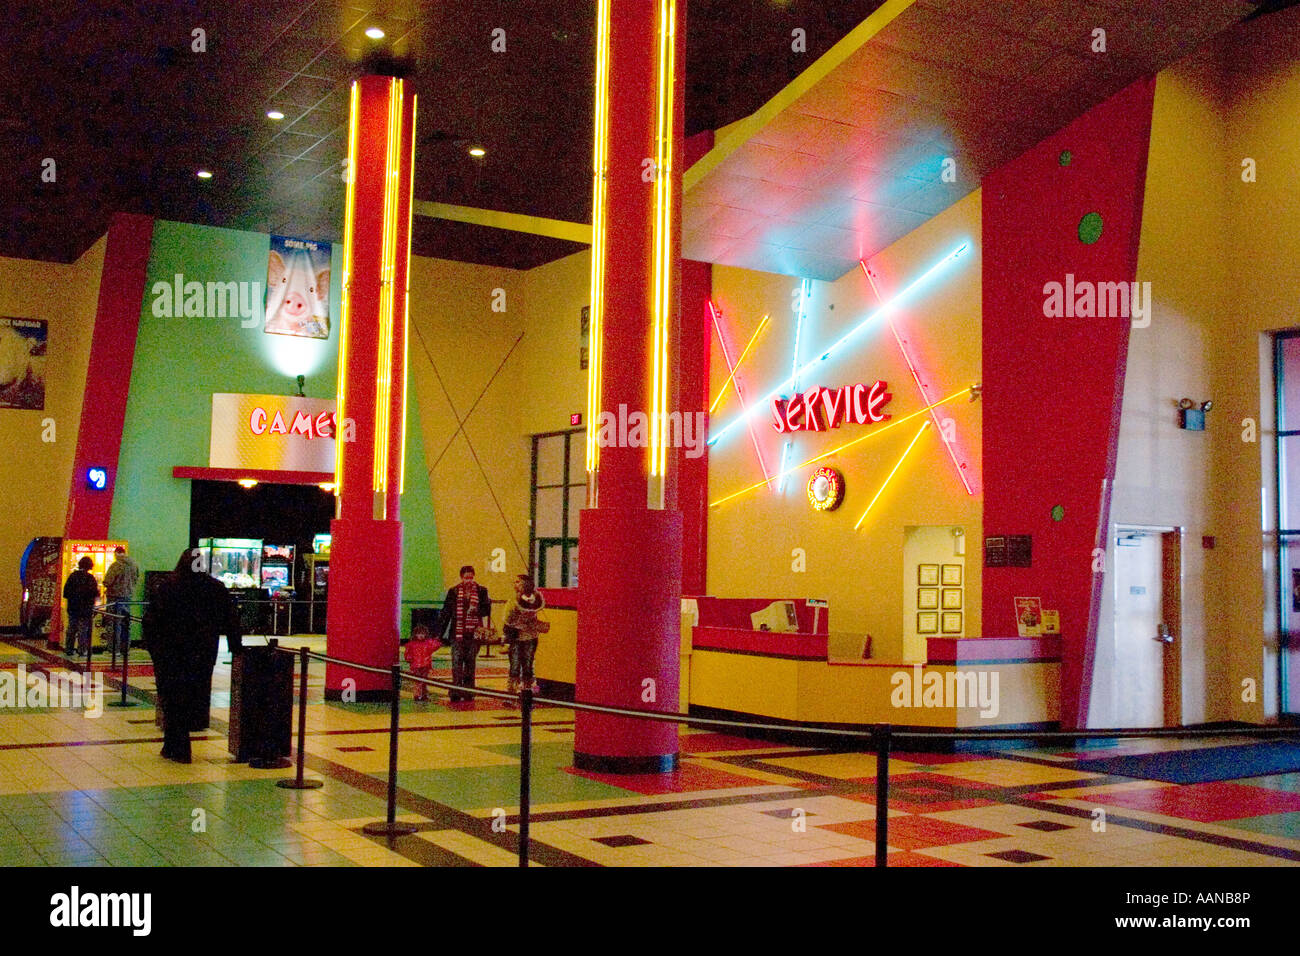 Movie Theater Lobby High Resolution Stock Photography And Images - Alamy